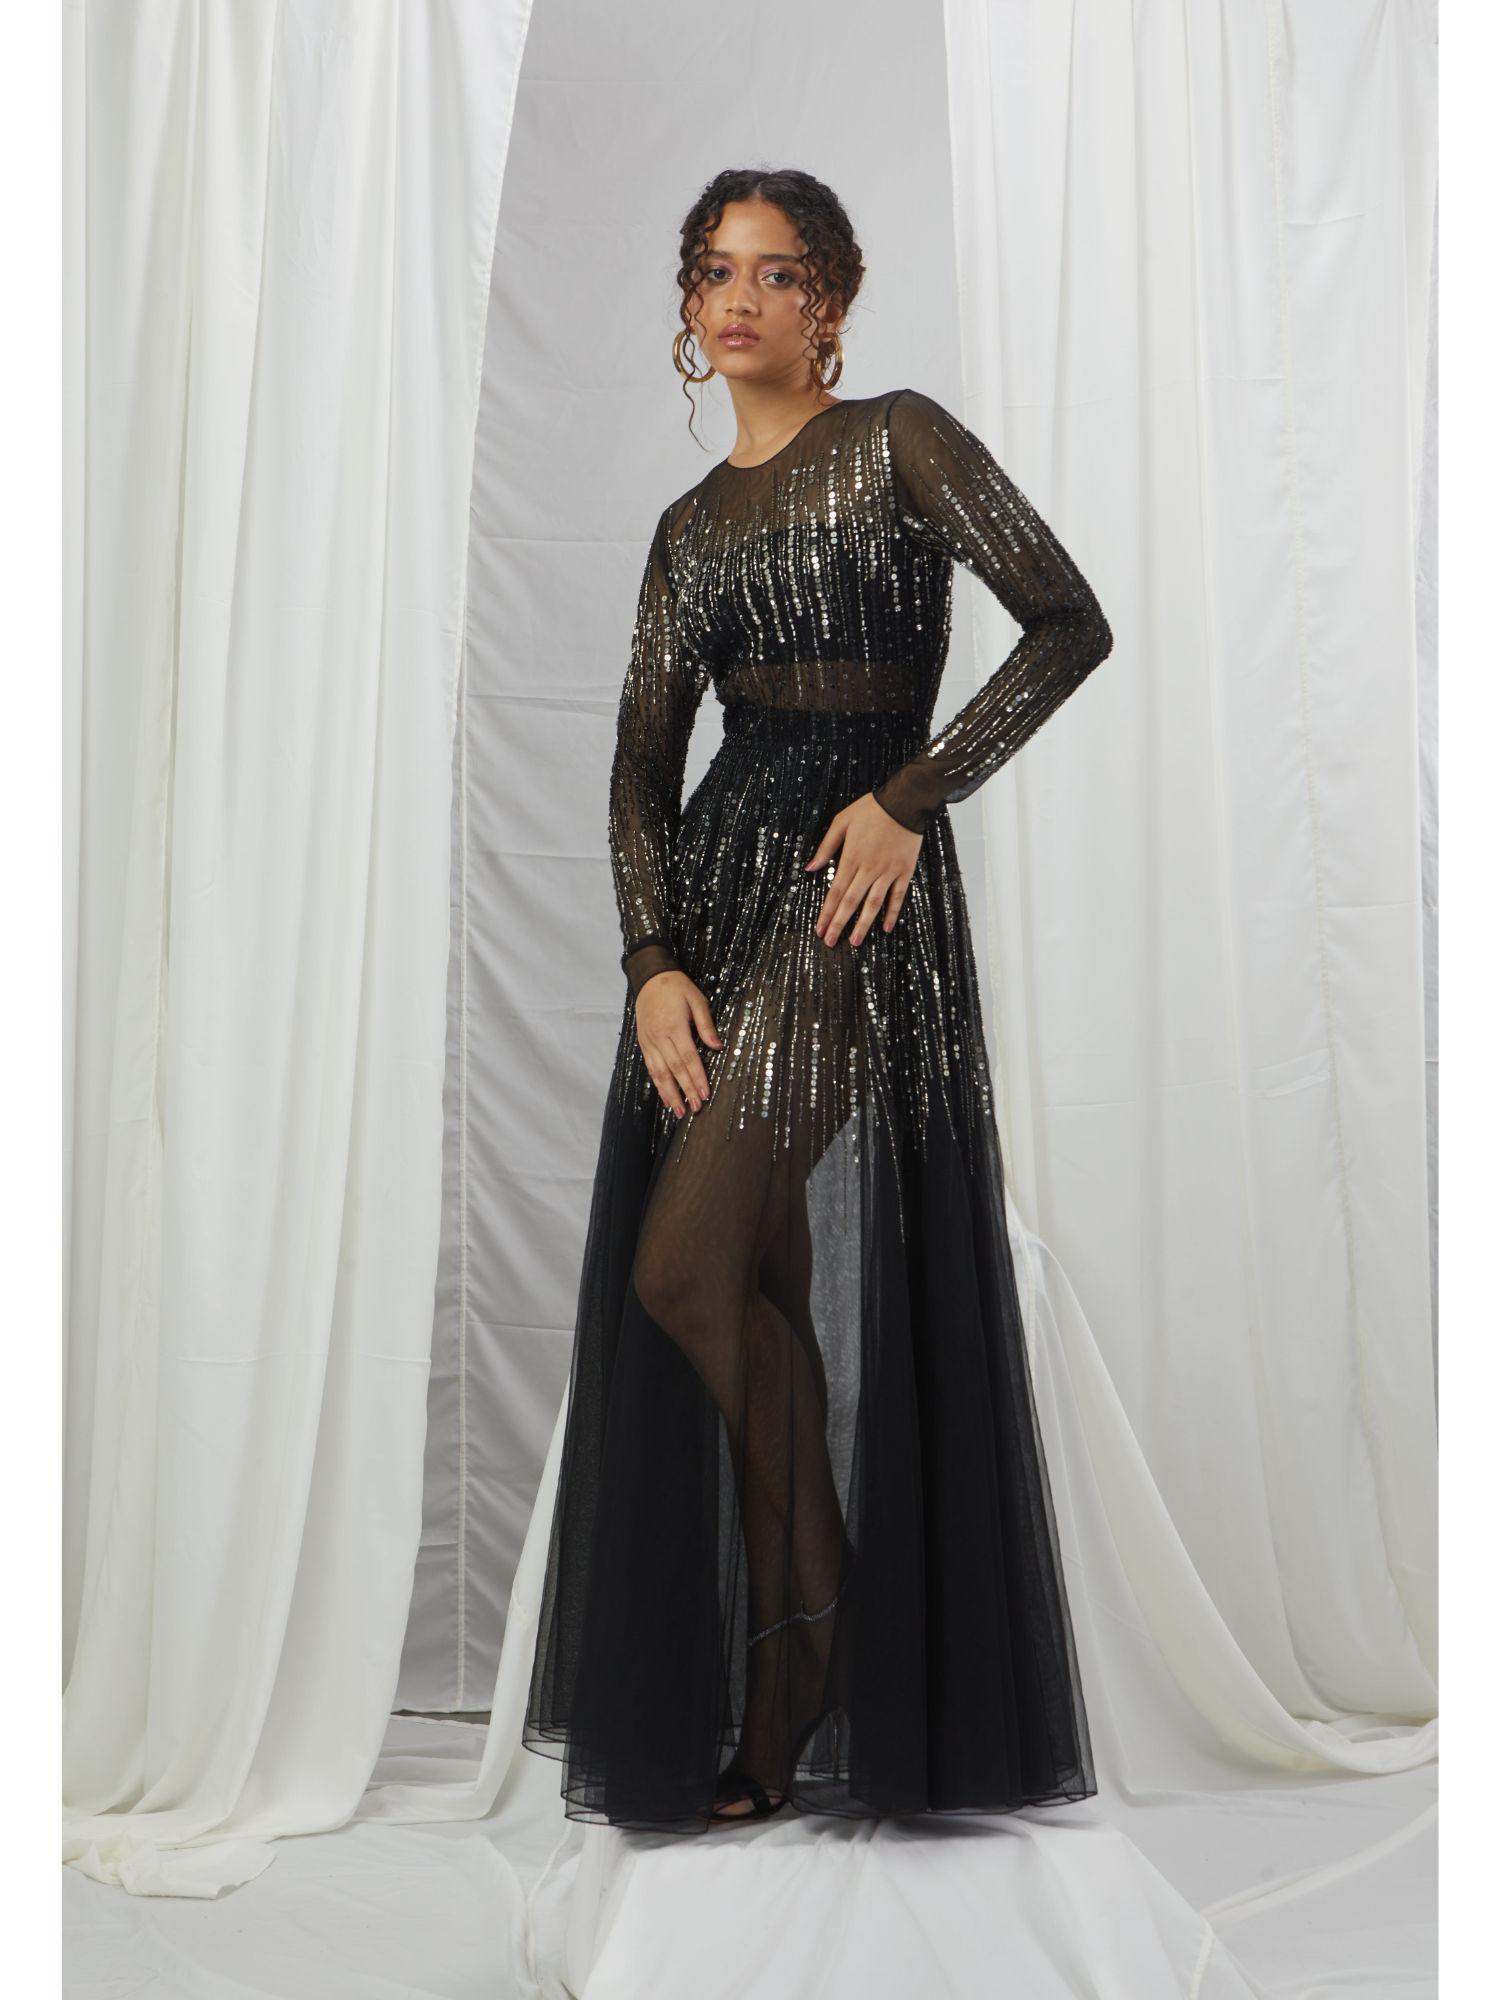 carbon sheer net gown with hand embellished & full sleeves black